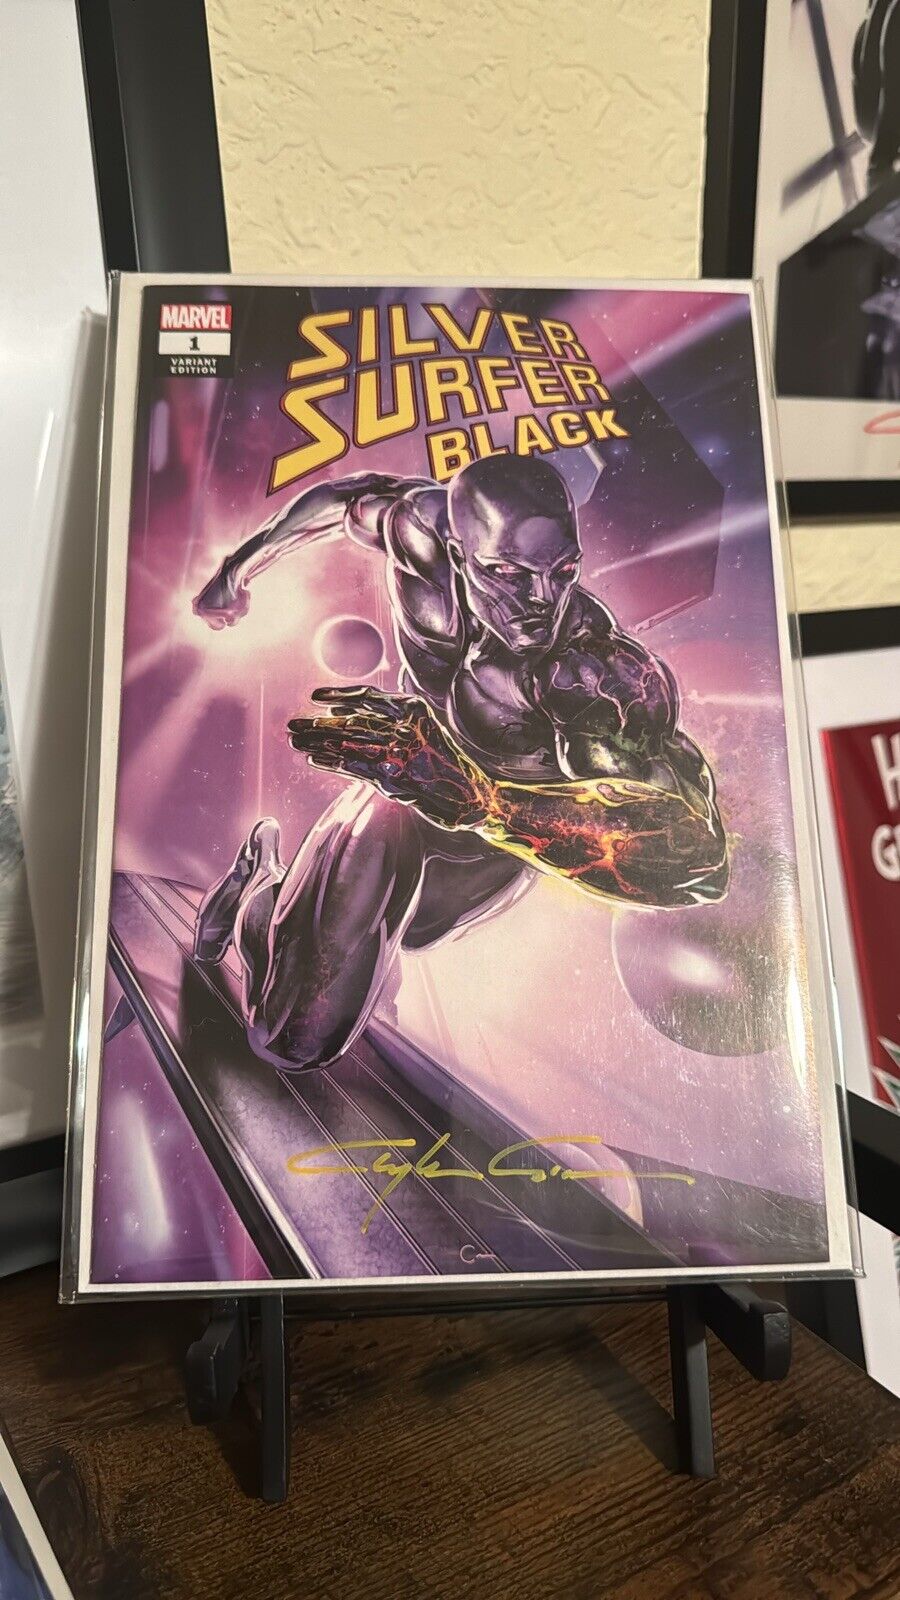 SILVER SURFER BLACK #1 SIGNED CLAYTON CRAIN VARIANT COVER! KNULL CAMEO! COA!!